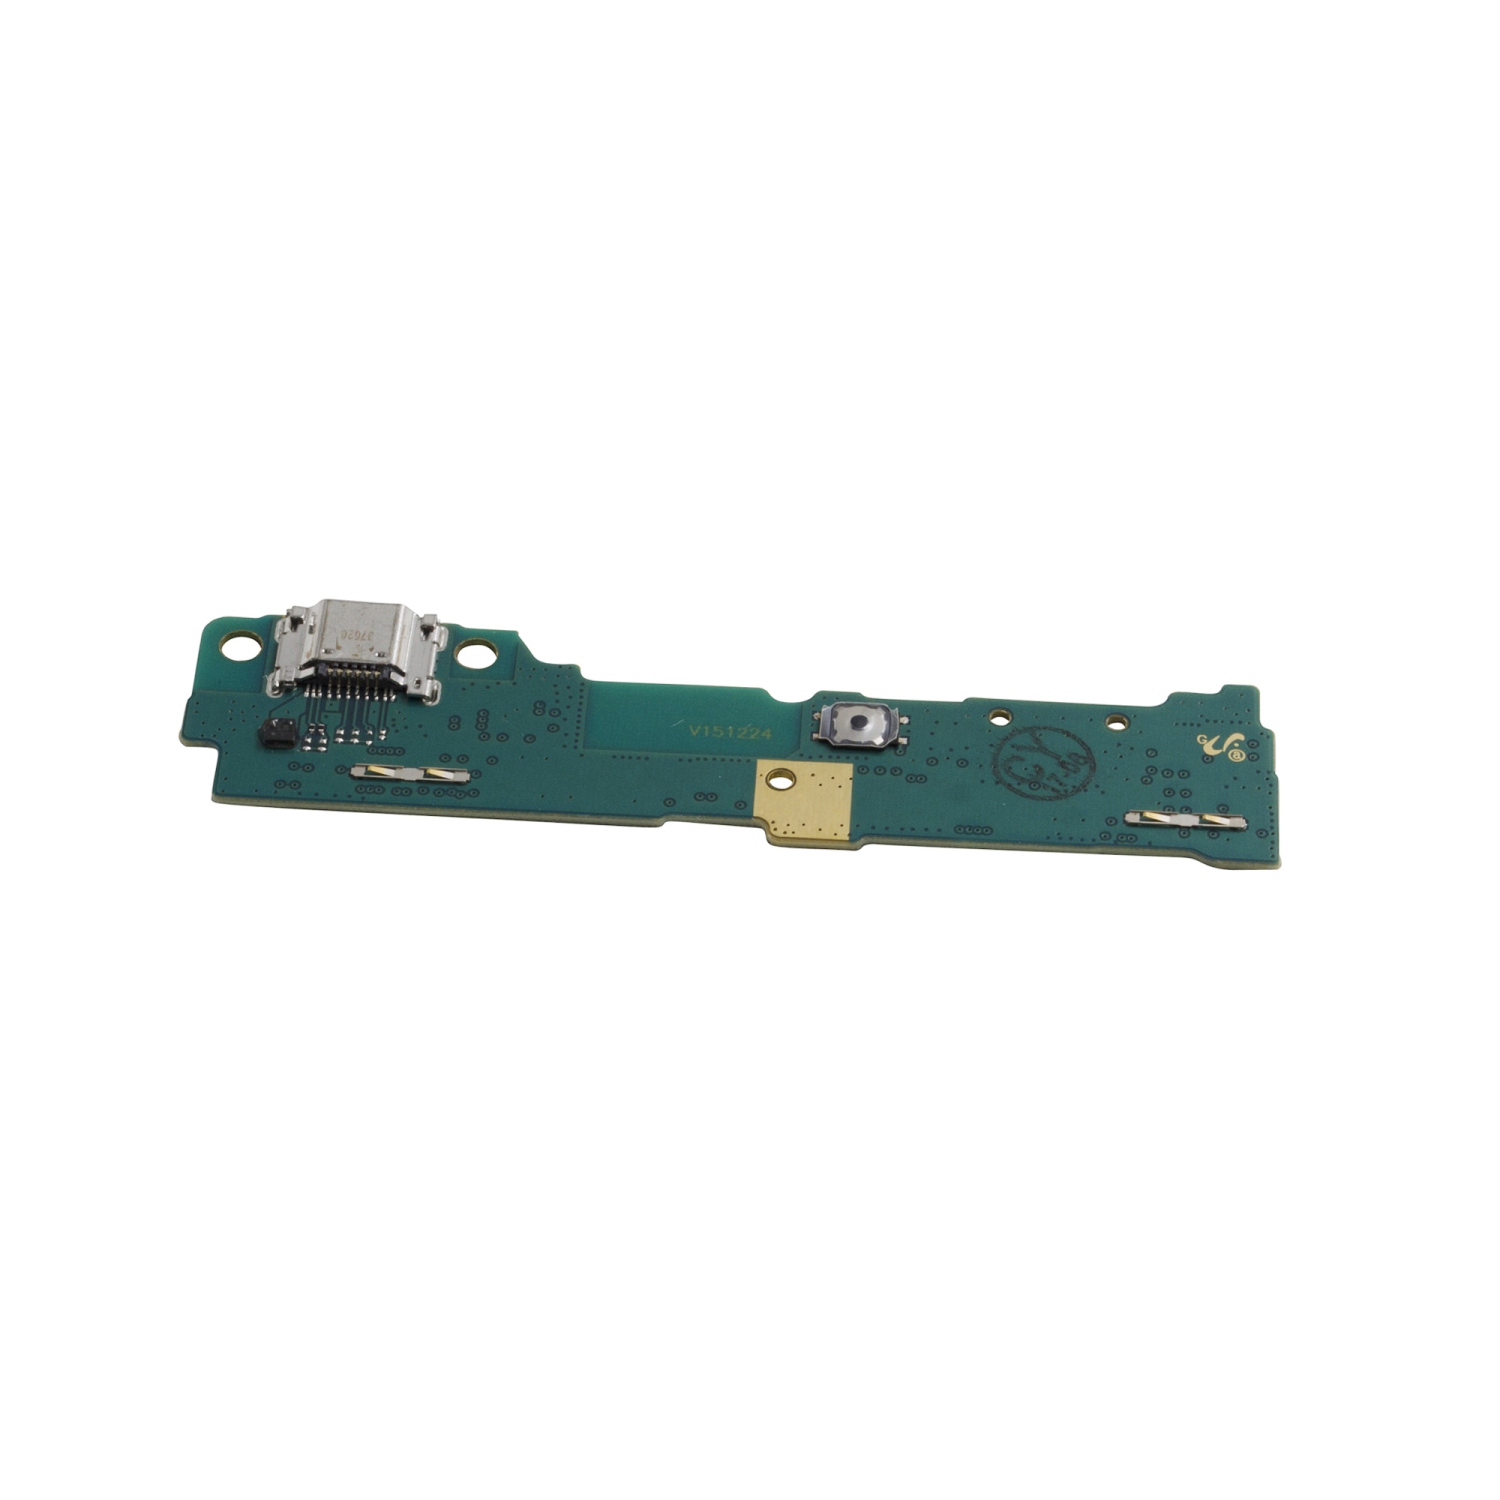 Samsung Galaxy Tab S2 9.7 T813N Charging Port Flex Cable Replacement